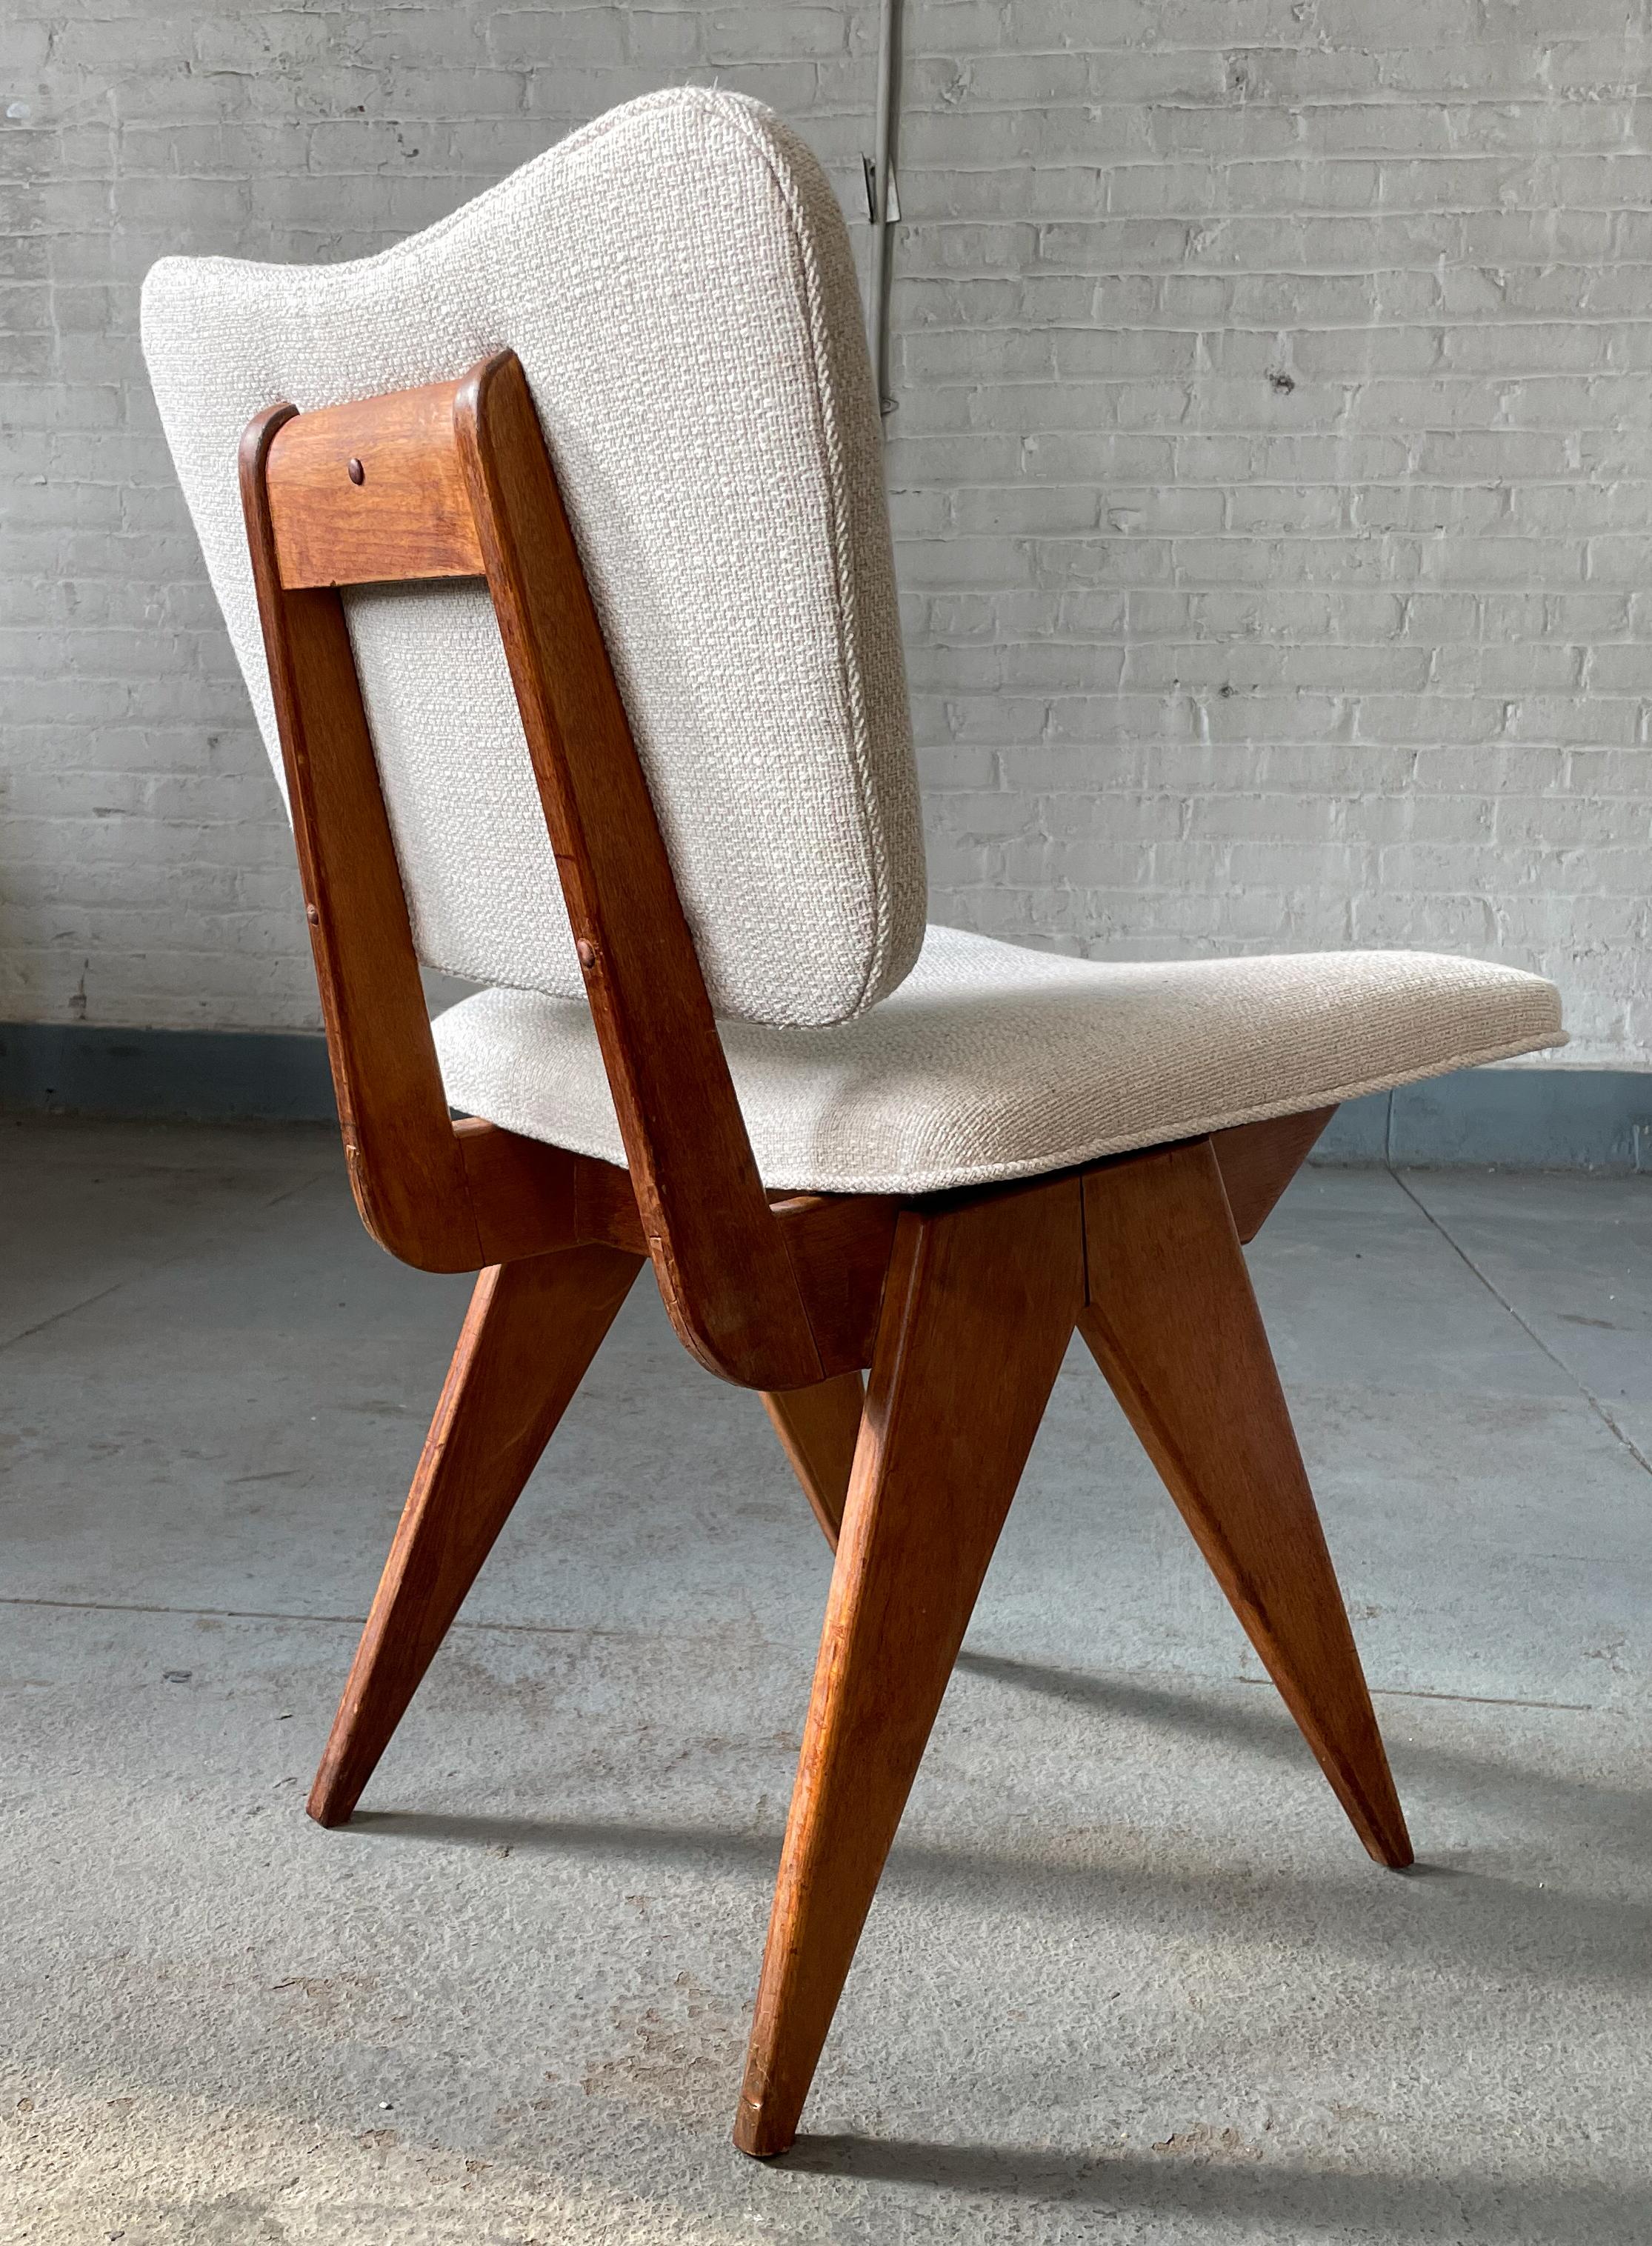 Fabric Single Early Jens Risom Chair for His Own Company